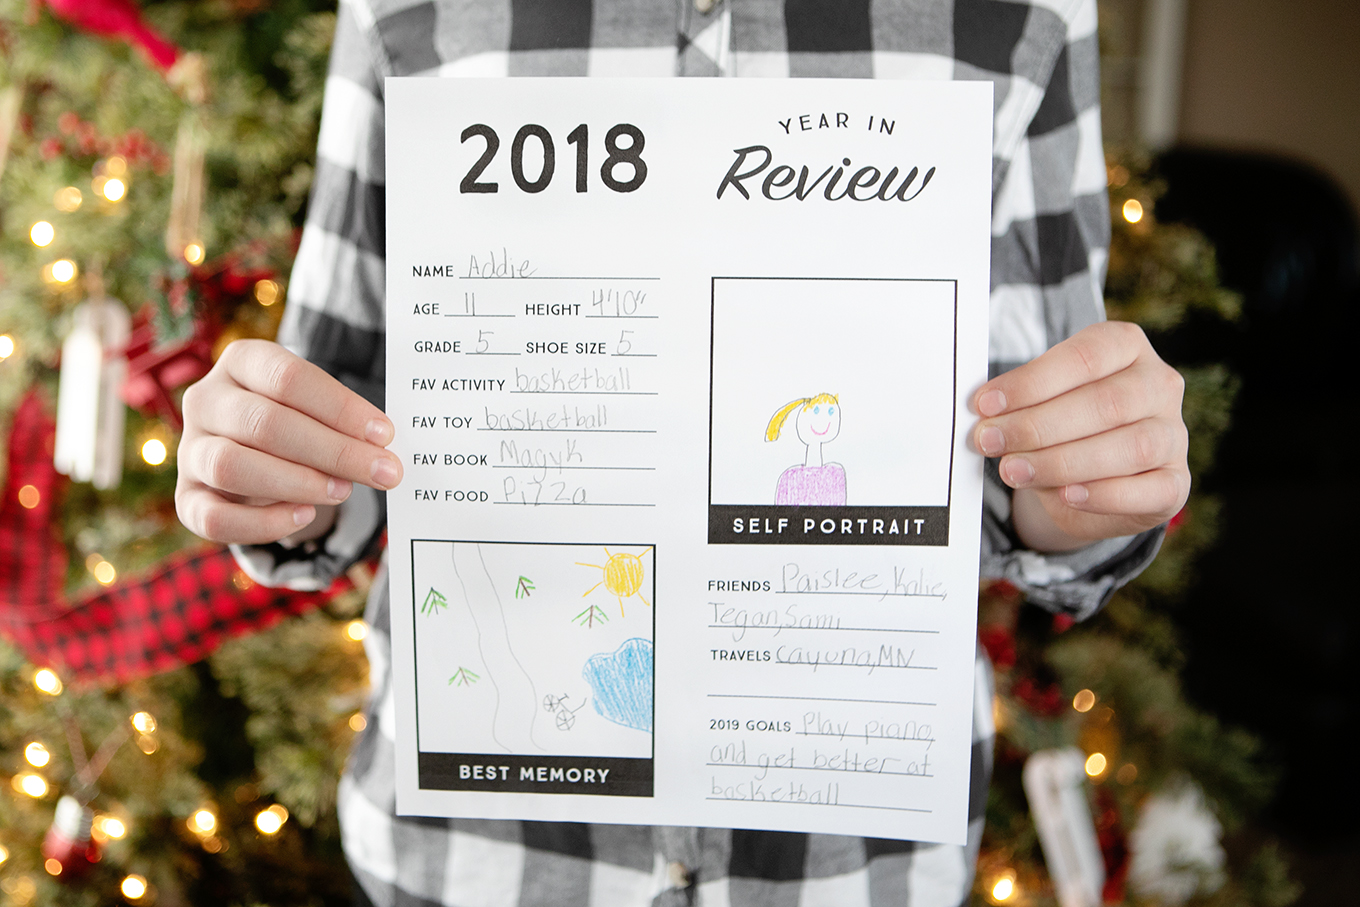 This free printable year in review sheet gives children a chance to reflect on their favorite memories from the past year and look ahead to new goals and adventures in 2019!